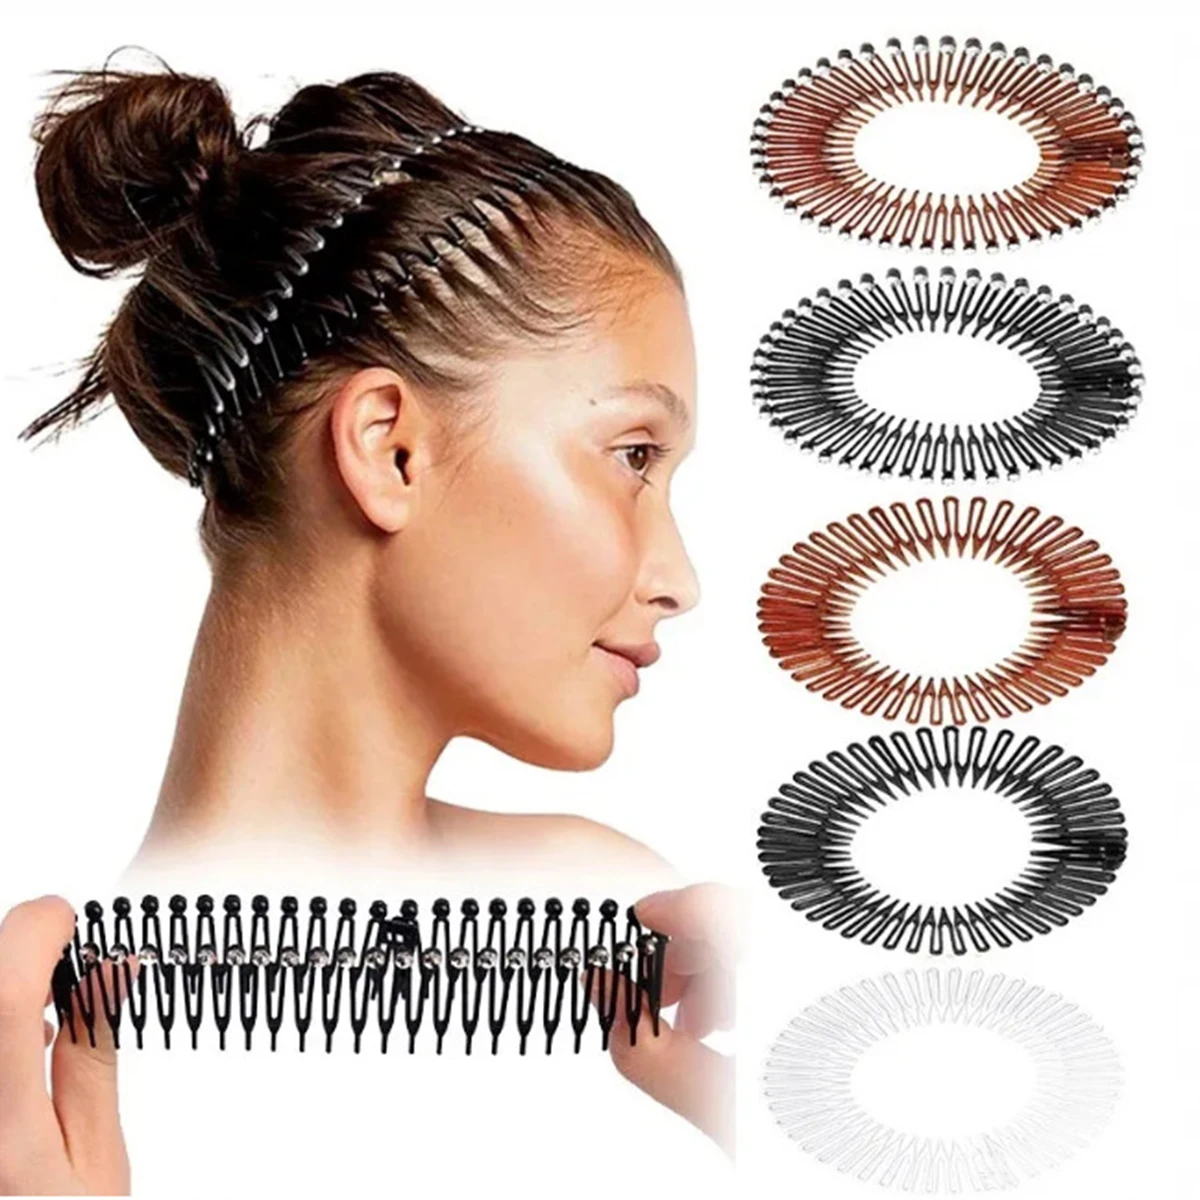 Good Quality 32cm Plastic Circular Wig Combs For Wig Caps Wig Clips For Hair Extensions Strong Black Lace Hair Comb